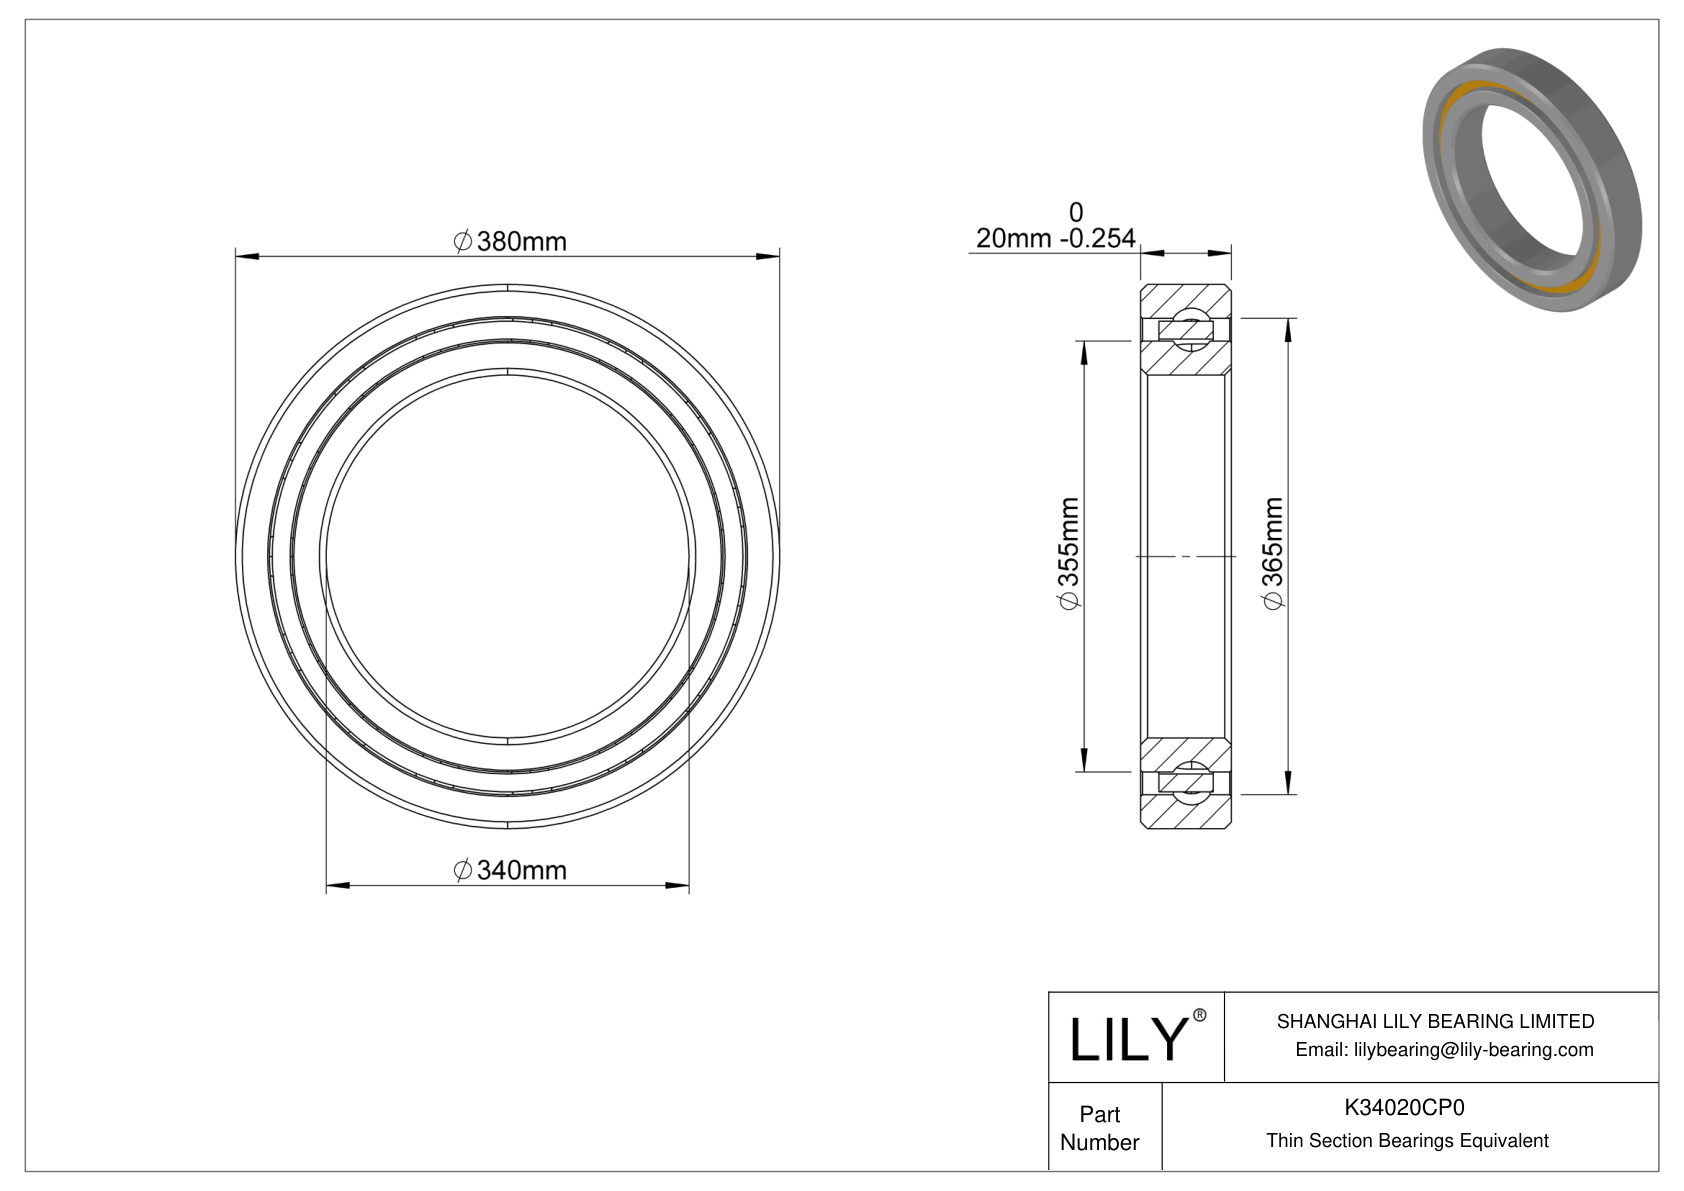 K34020CP0 Constant Section (CS) Bearings cad drawing